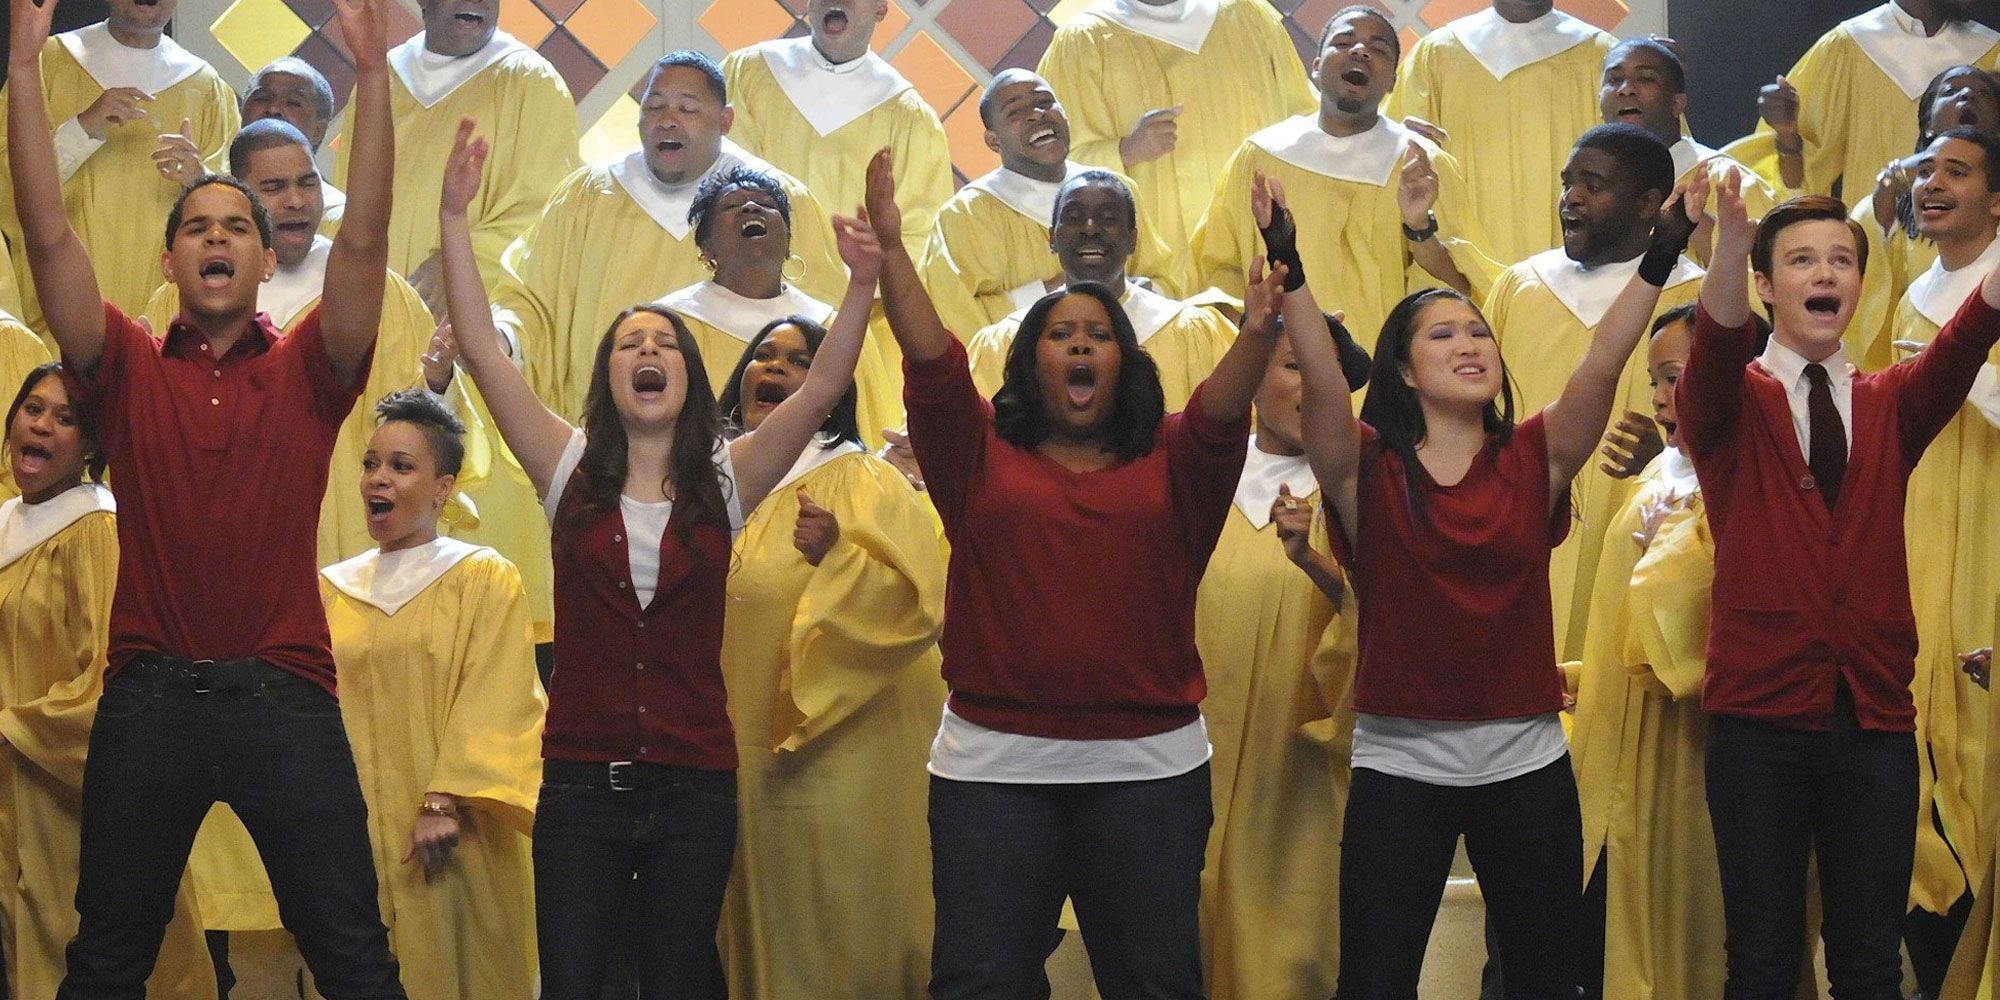 The club sings with a choir in Glee S1E15 The Power Of Madonna